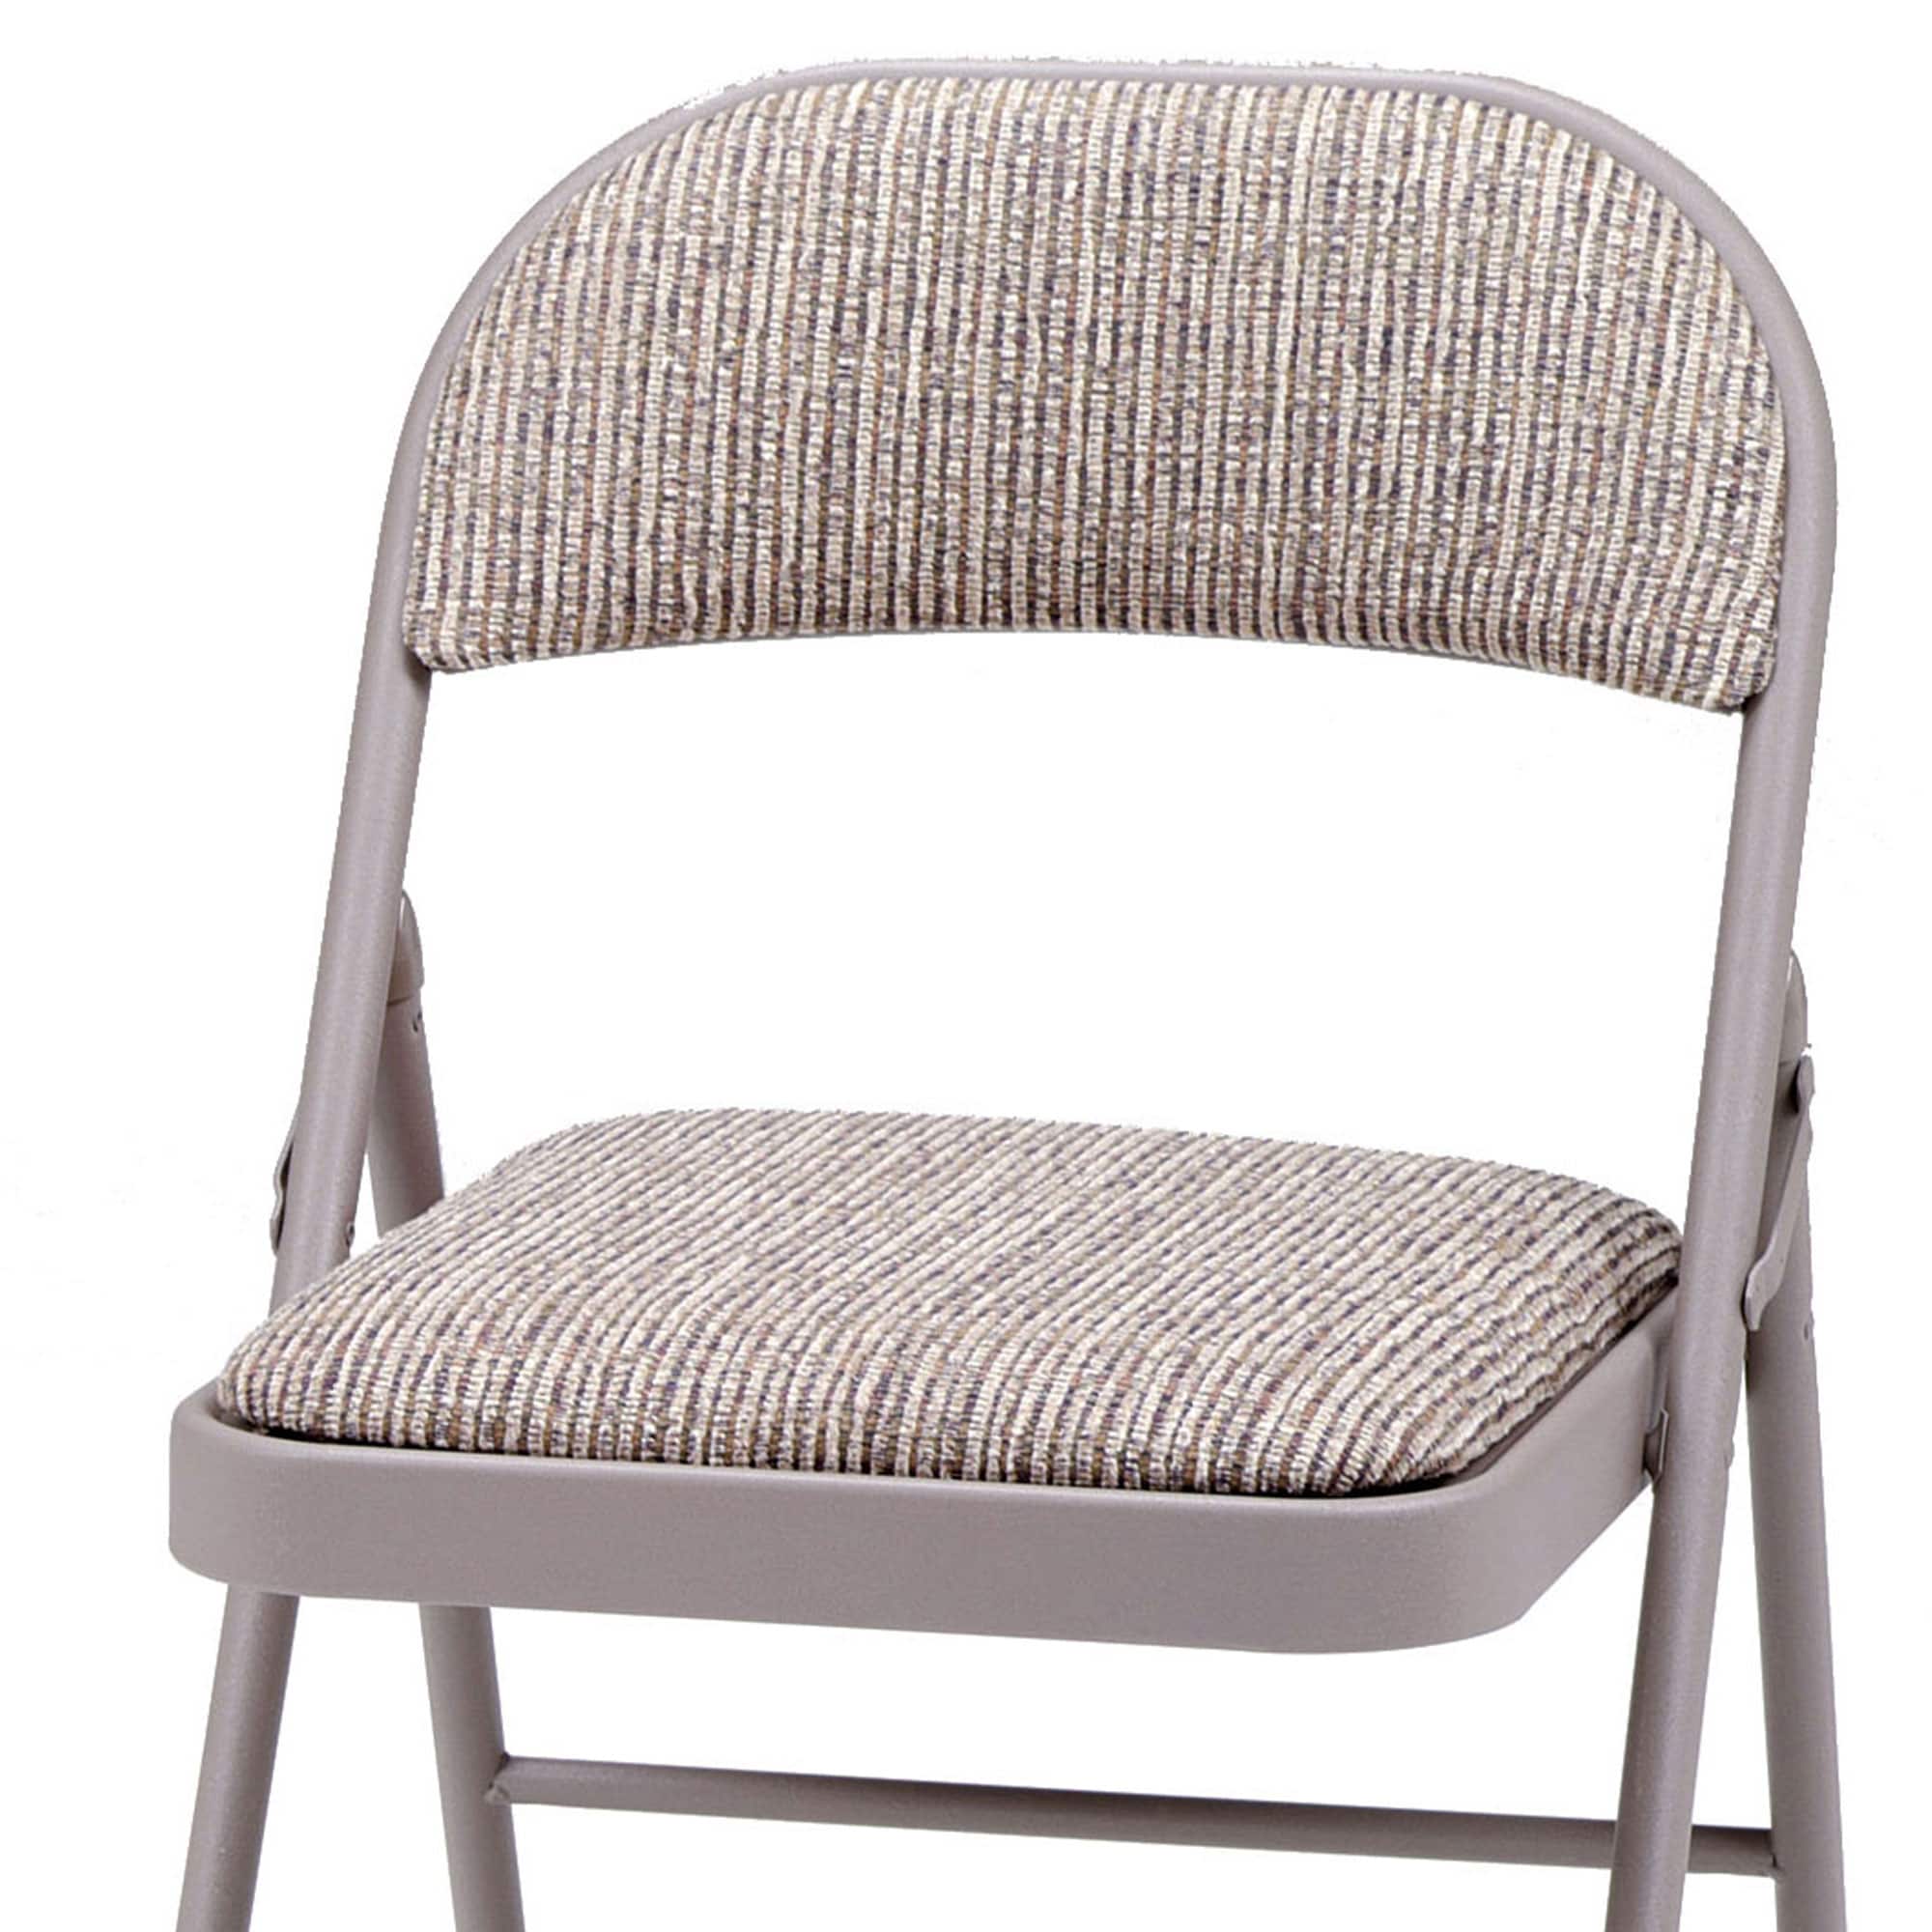 Meco Upholstered Folding Chair, 4-Pack